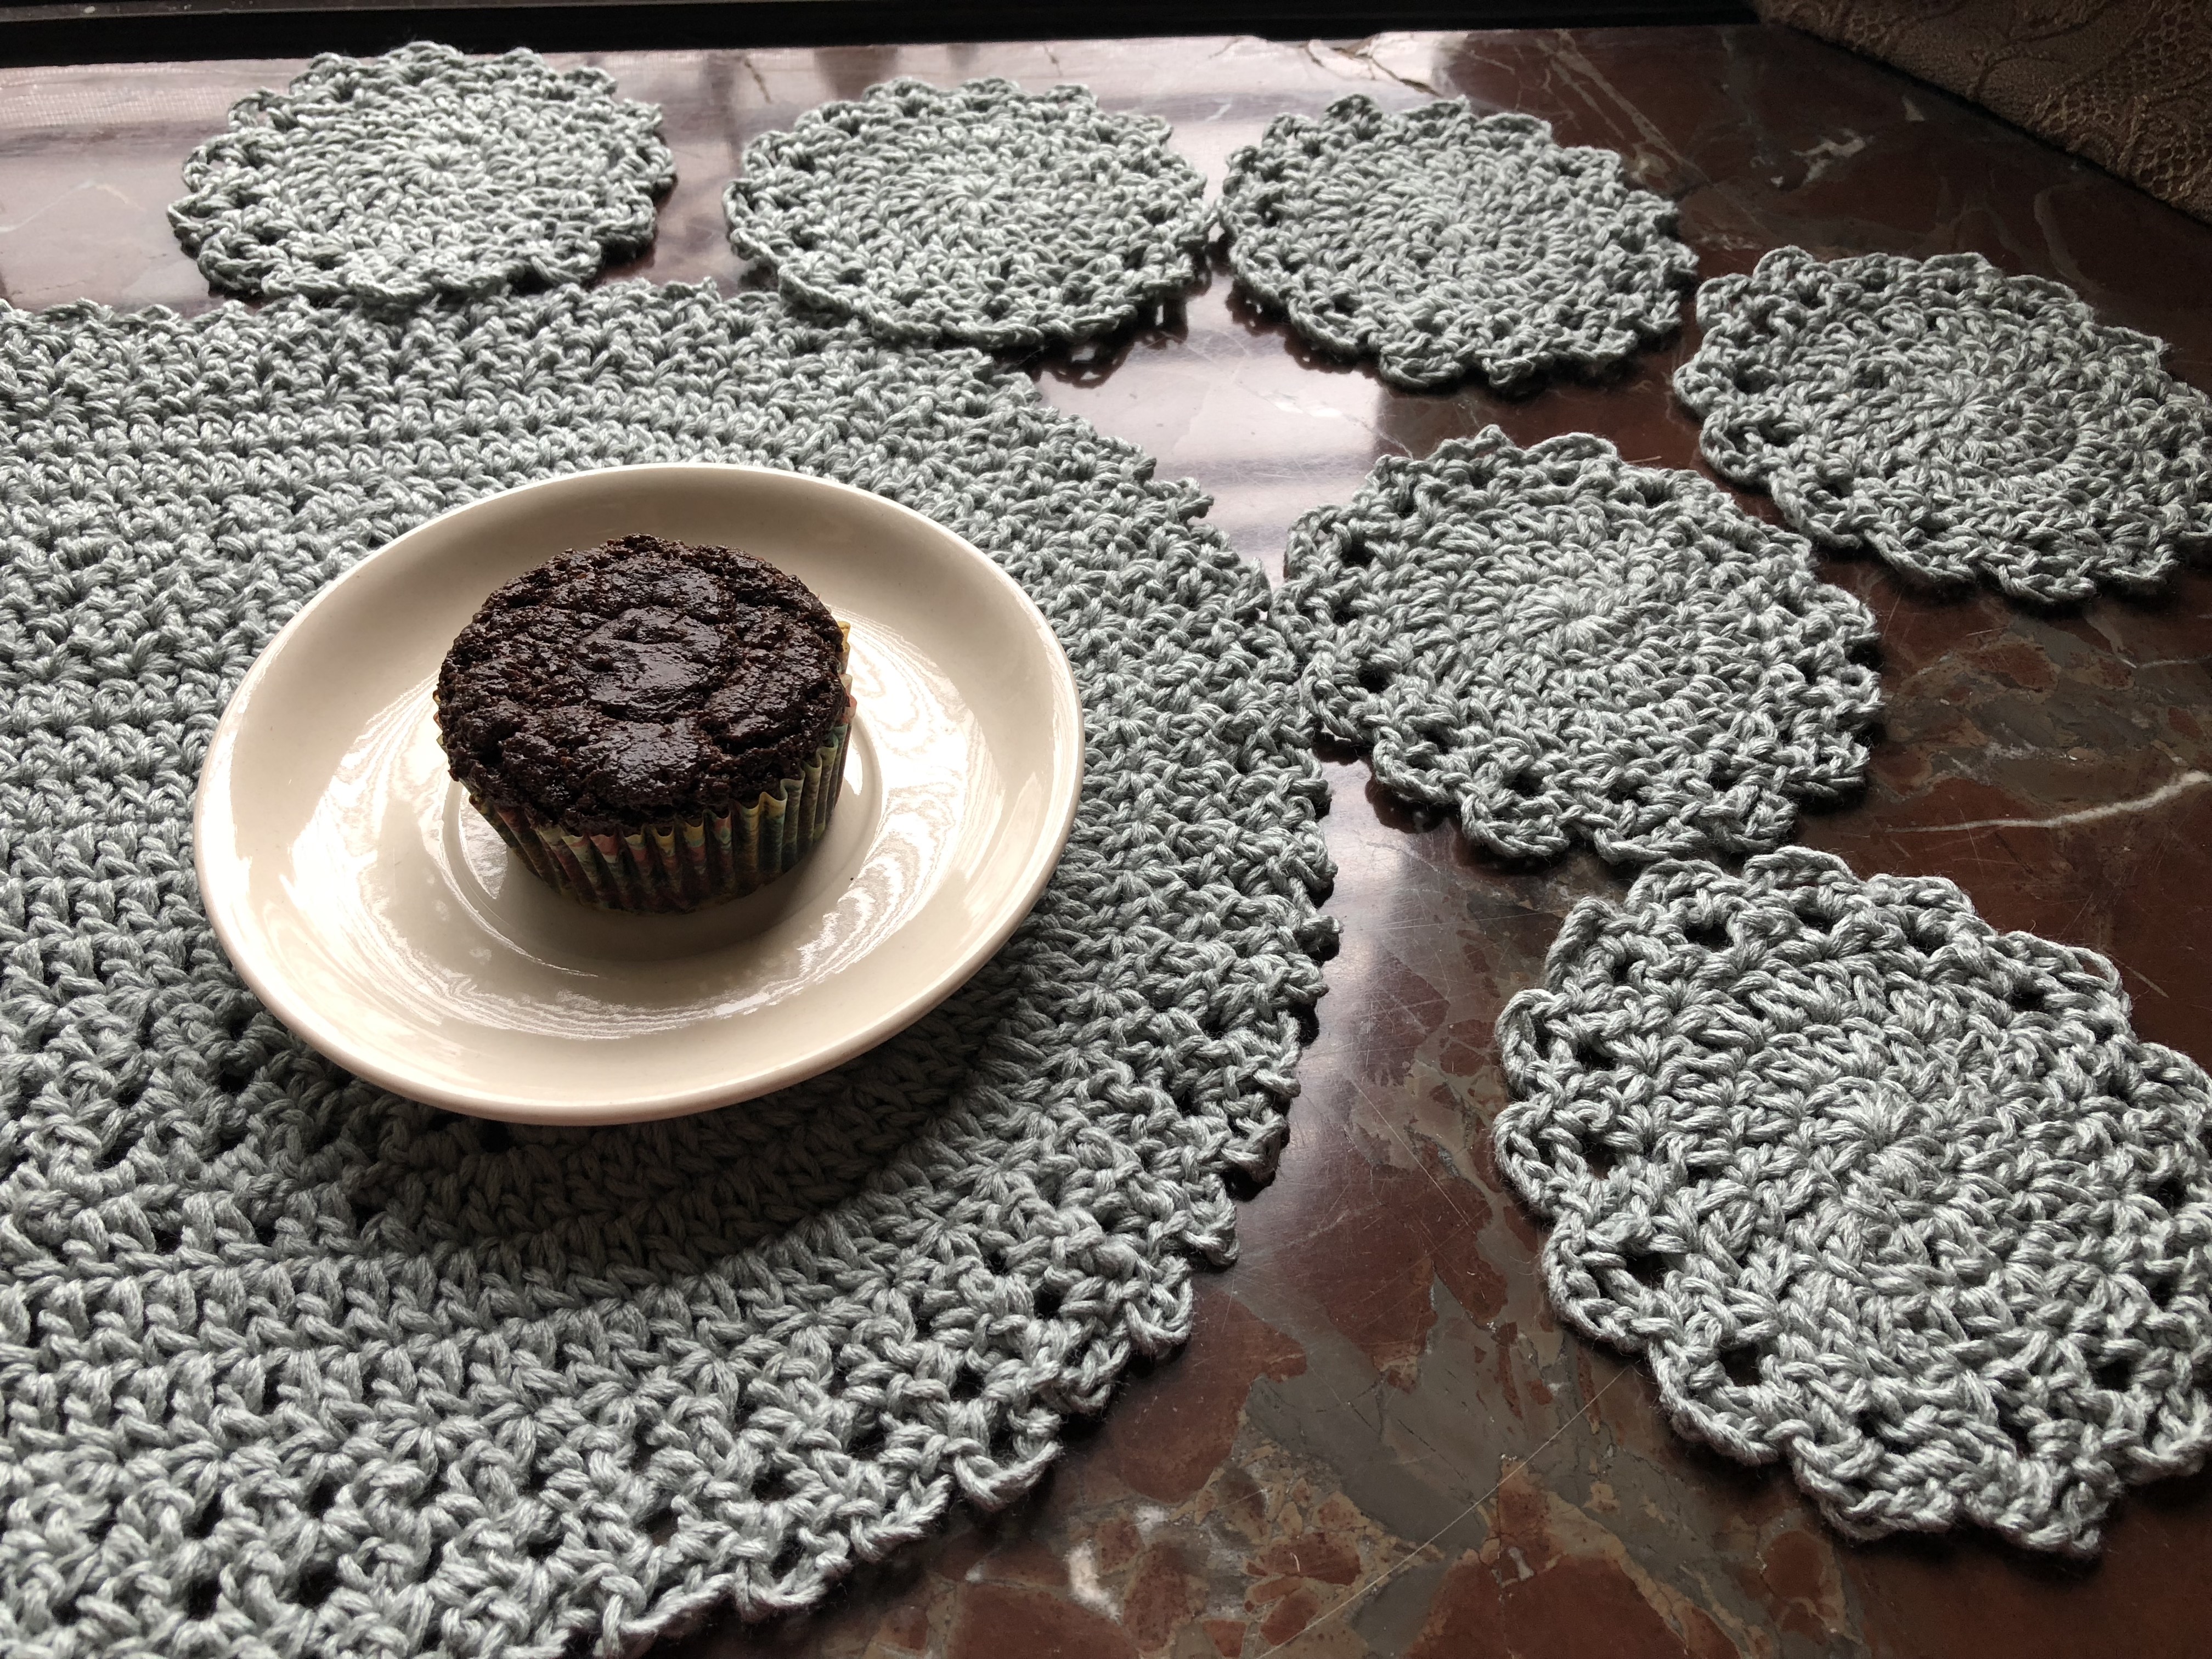 Lacy Placemat and Doily Coasters